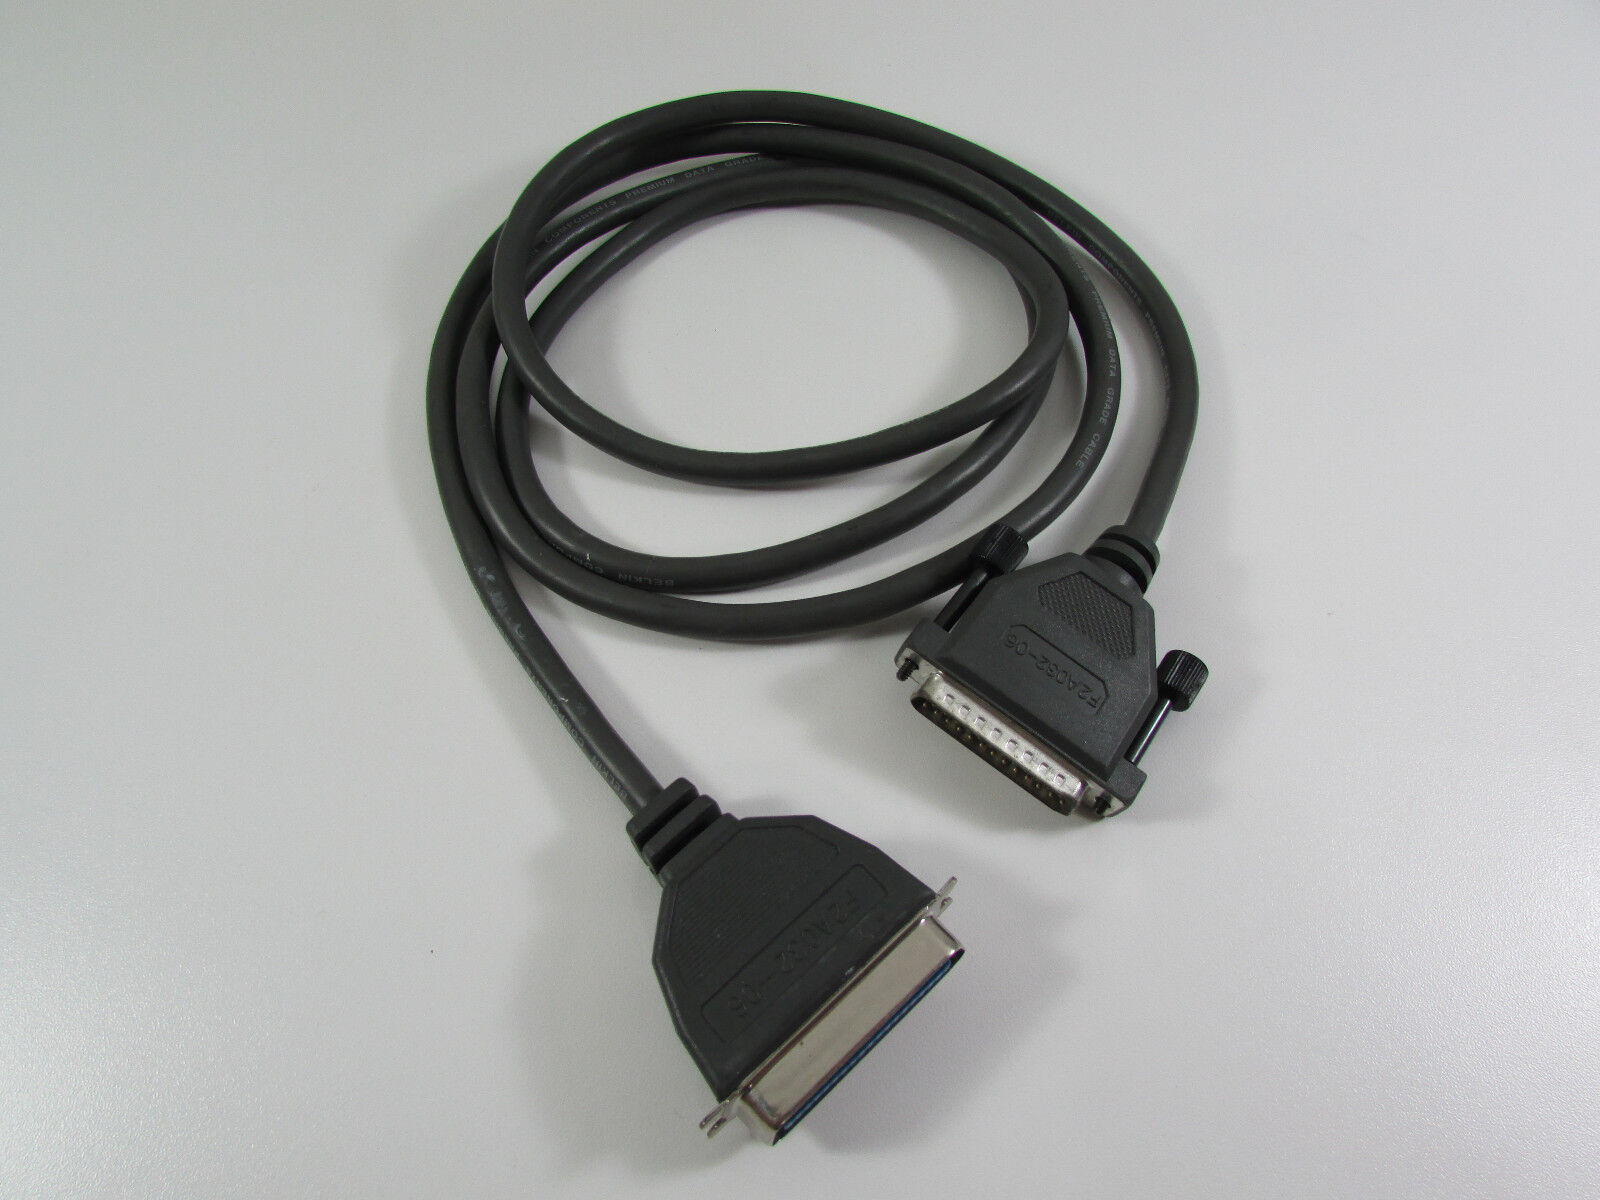 Belkin Pro Series Parallel 6\' Printer Cable IBM Compatible F2A032-06 